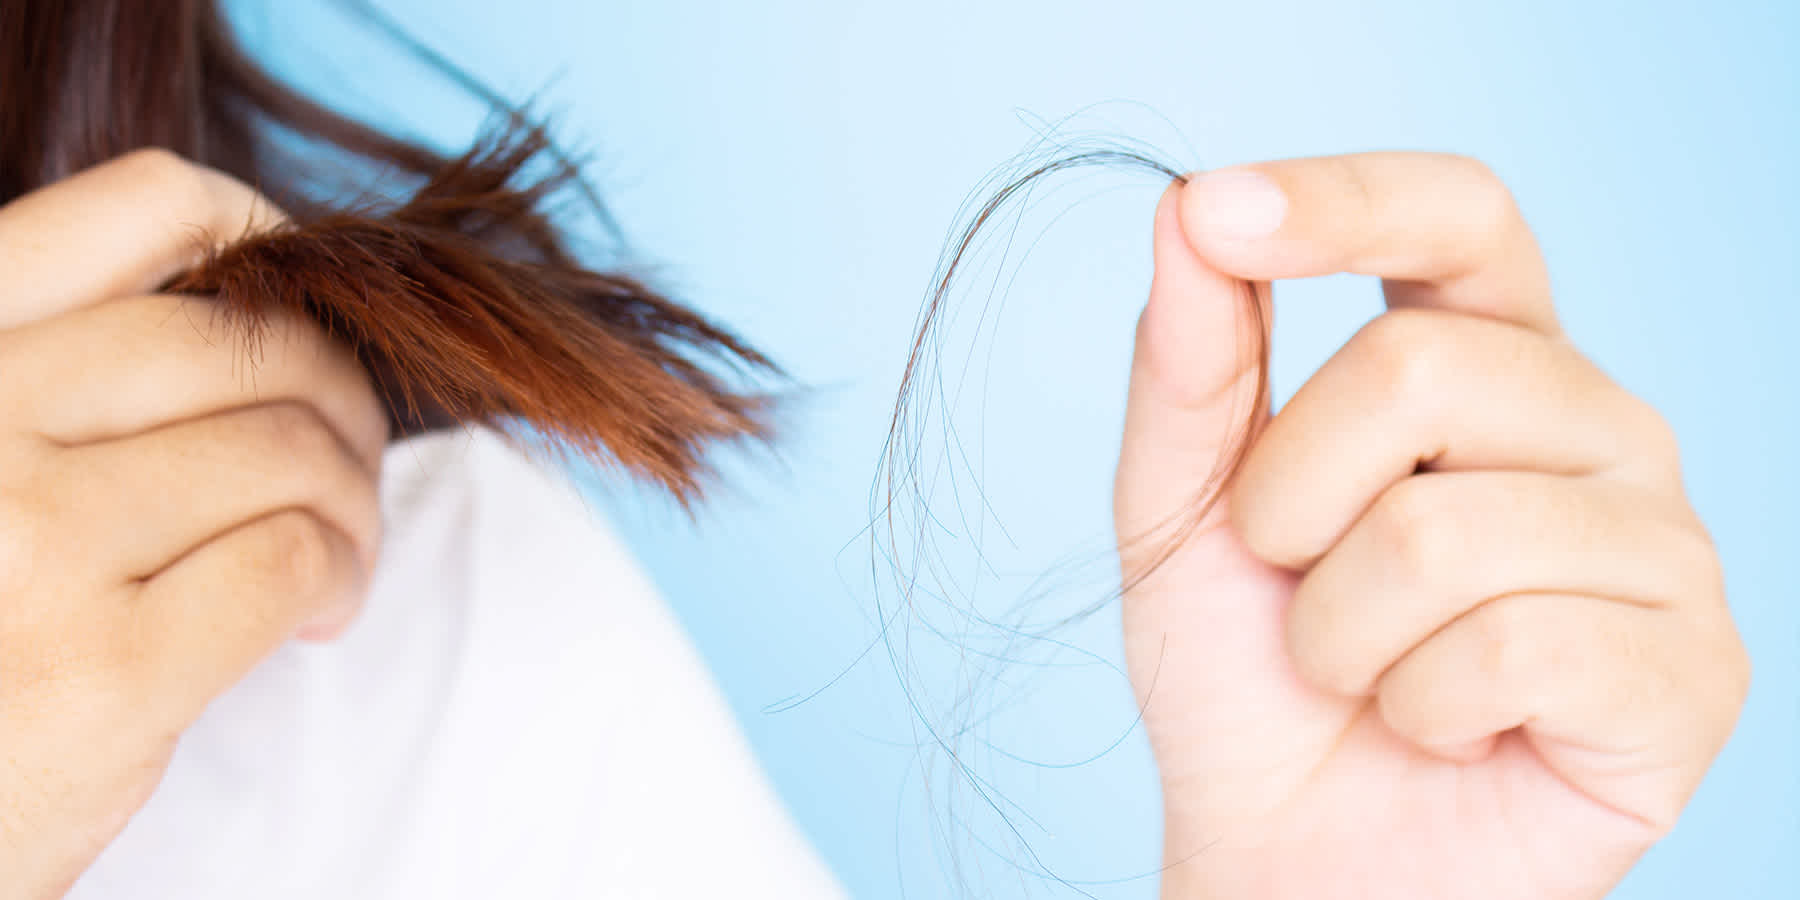 Can hormones cause hair loss?